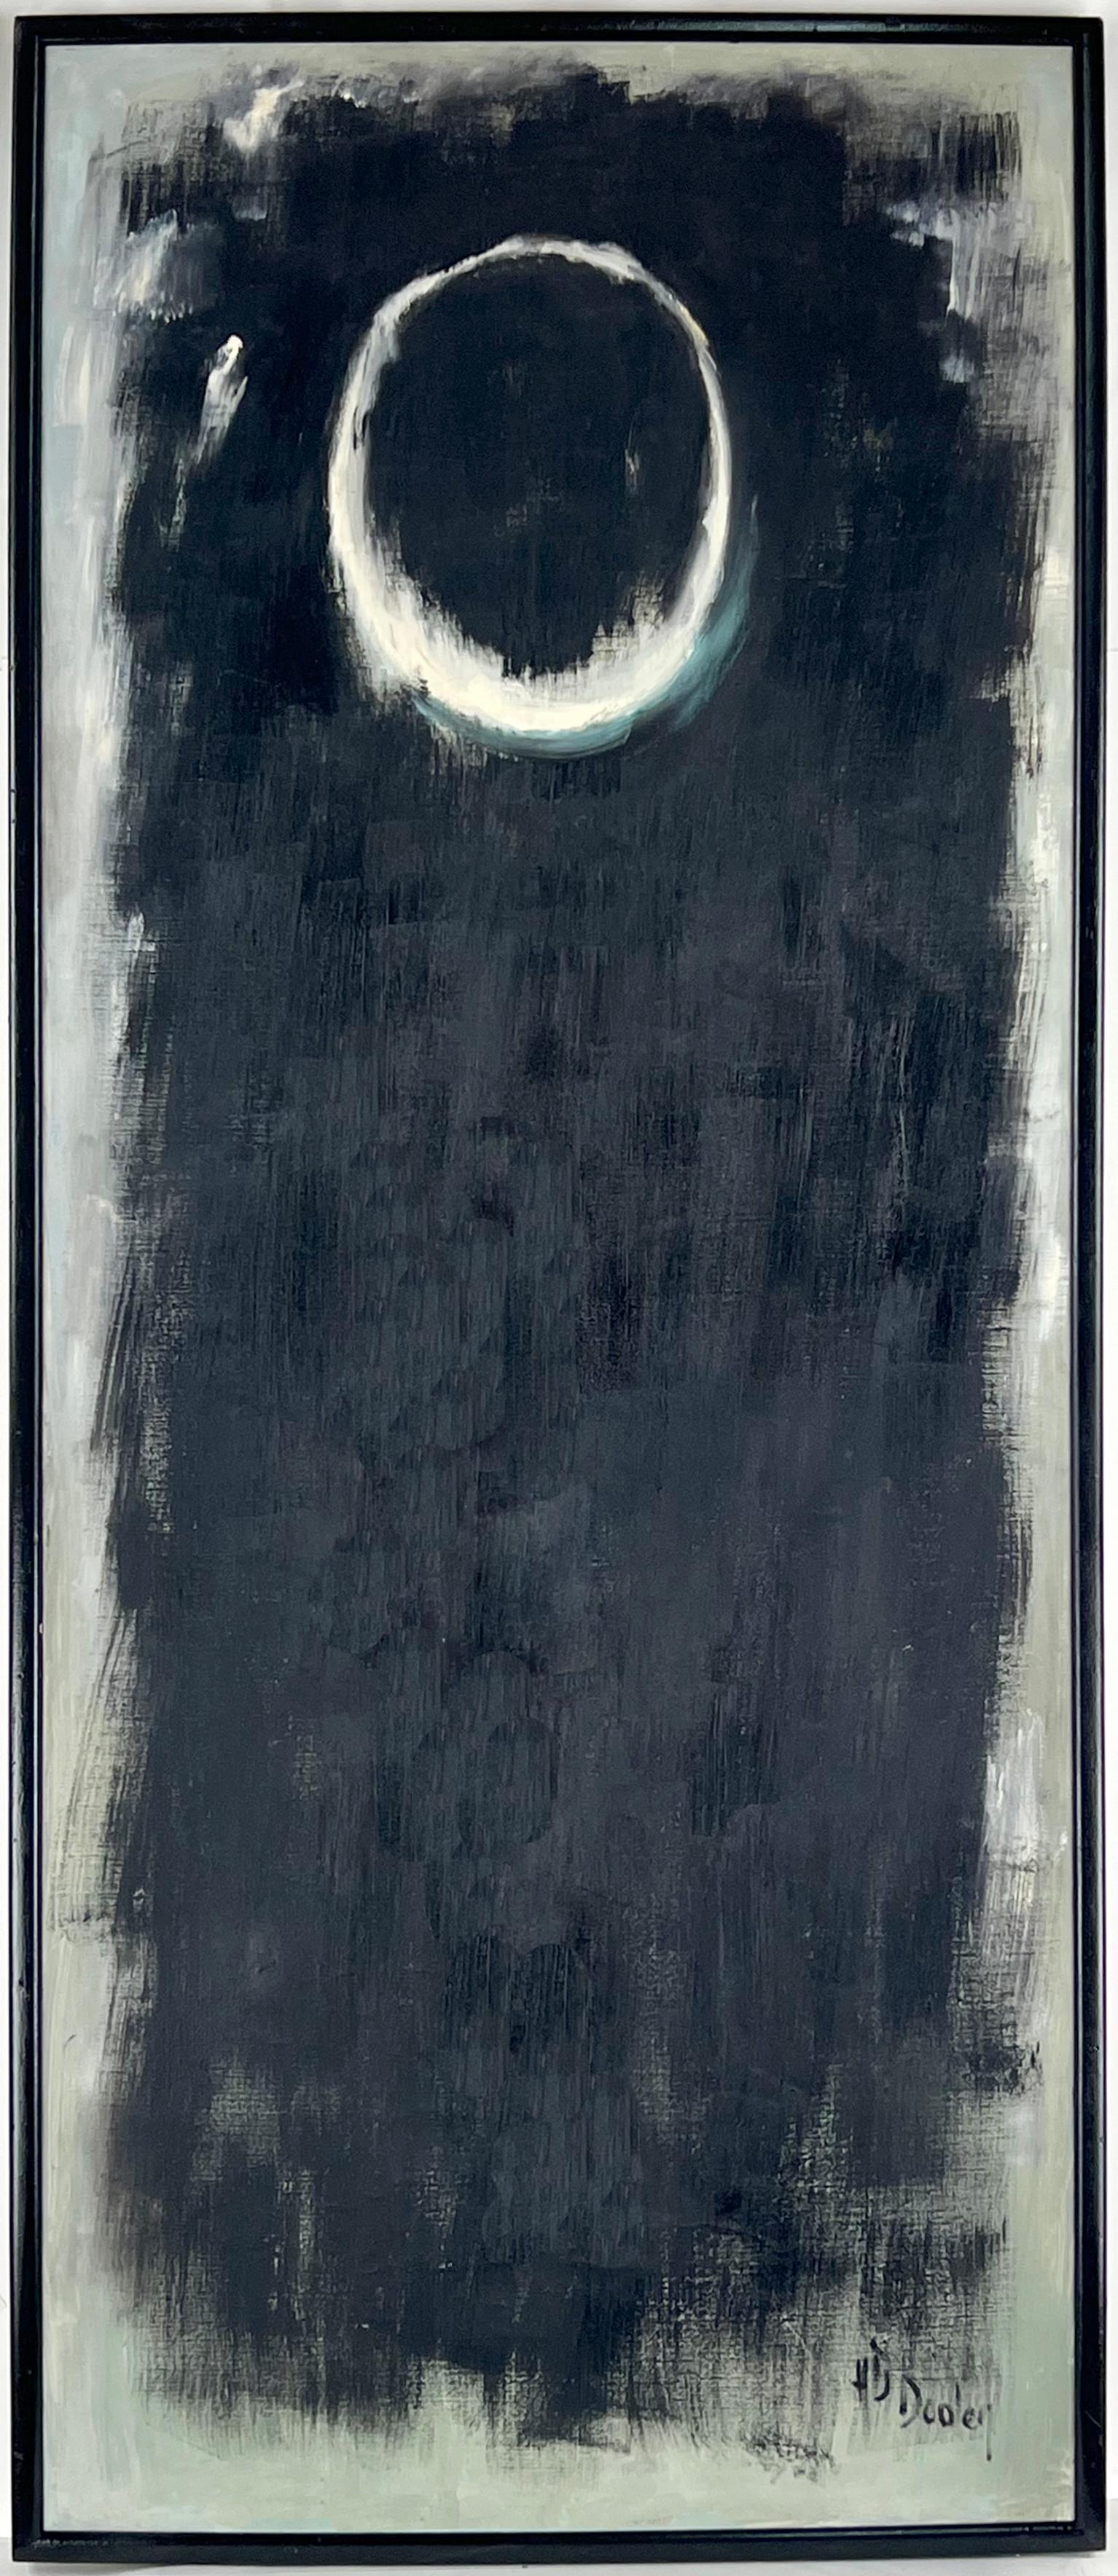 Helen Dooley Abstract Painting - Taos Desert Moon Vintage Black and Grey Monotone Abstract -- "In the Beginning"